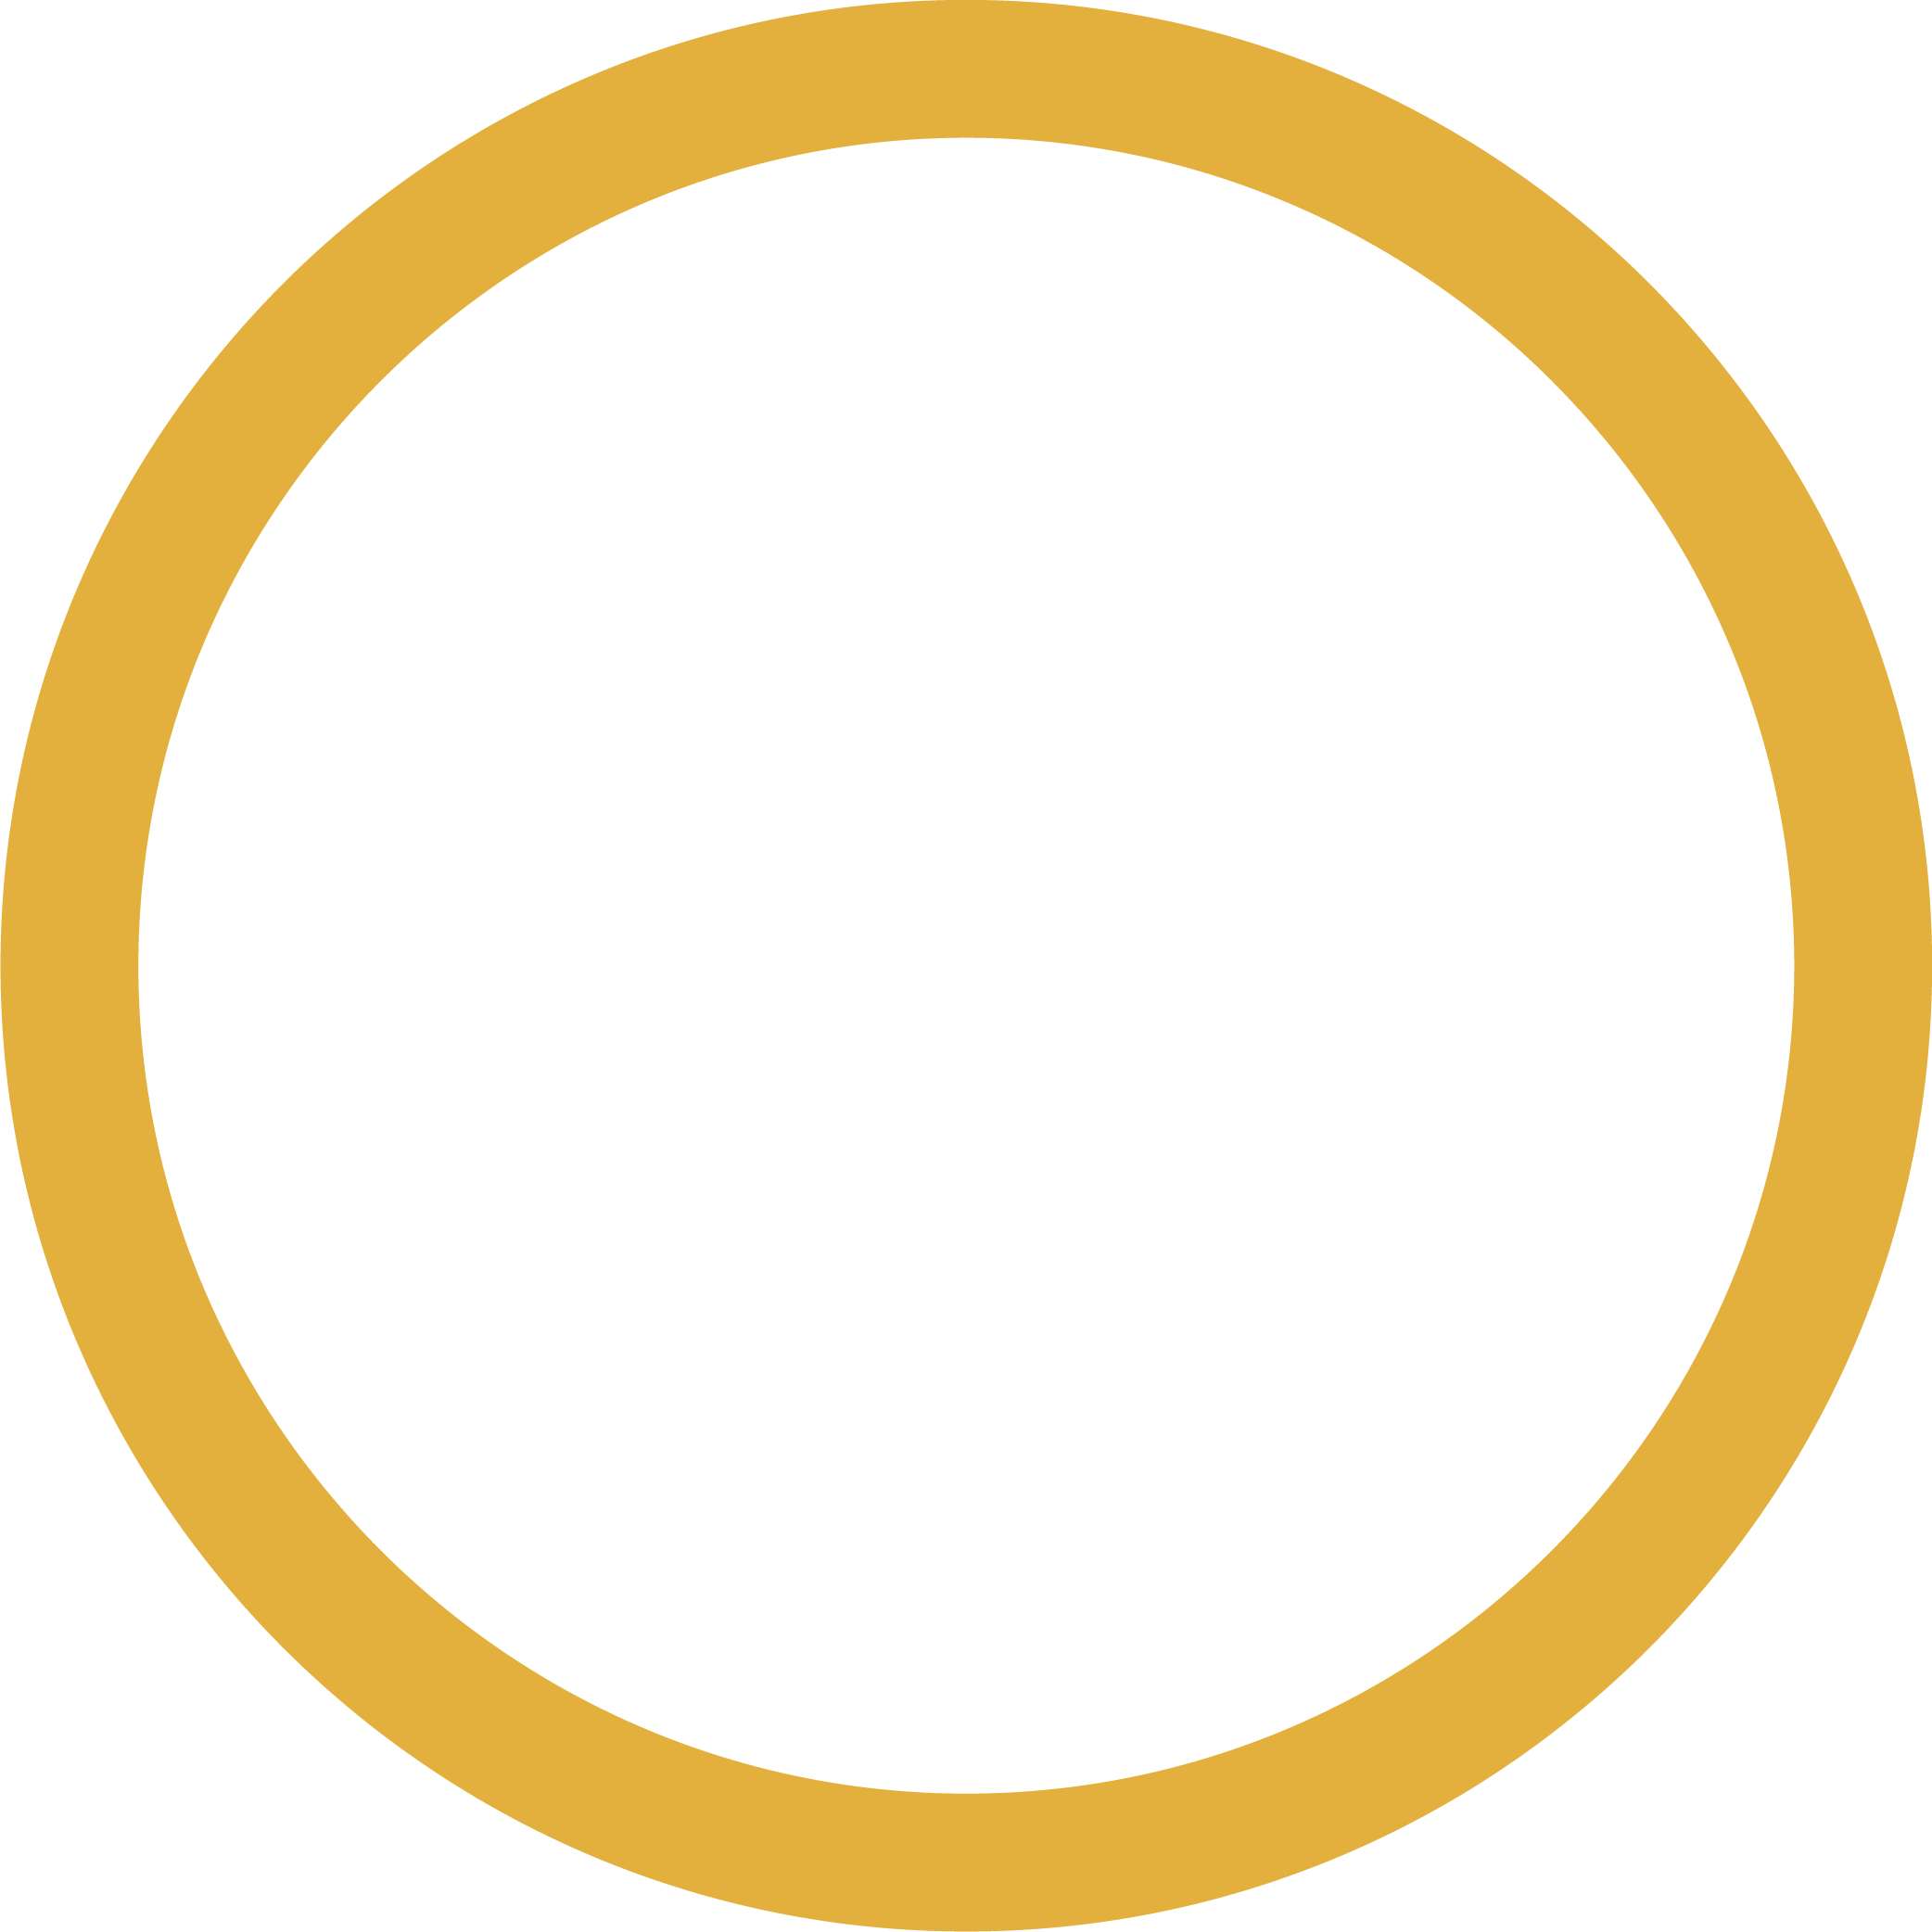 Icon of an Eye Denoting the Visualization Phase of Our Brand Building Methodology